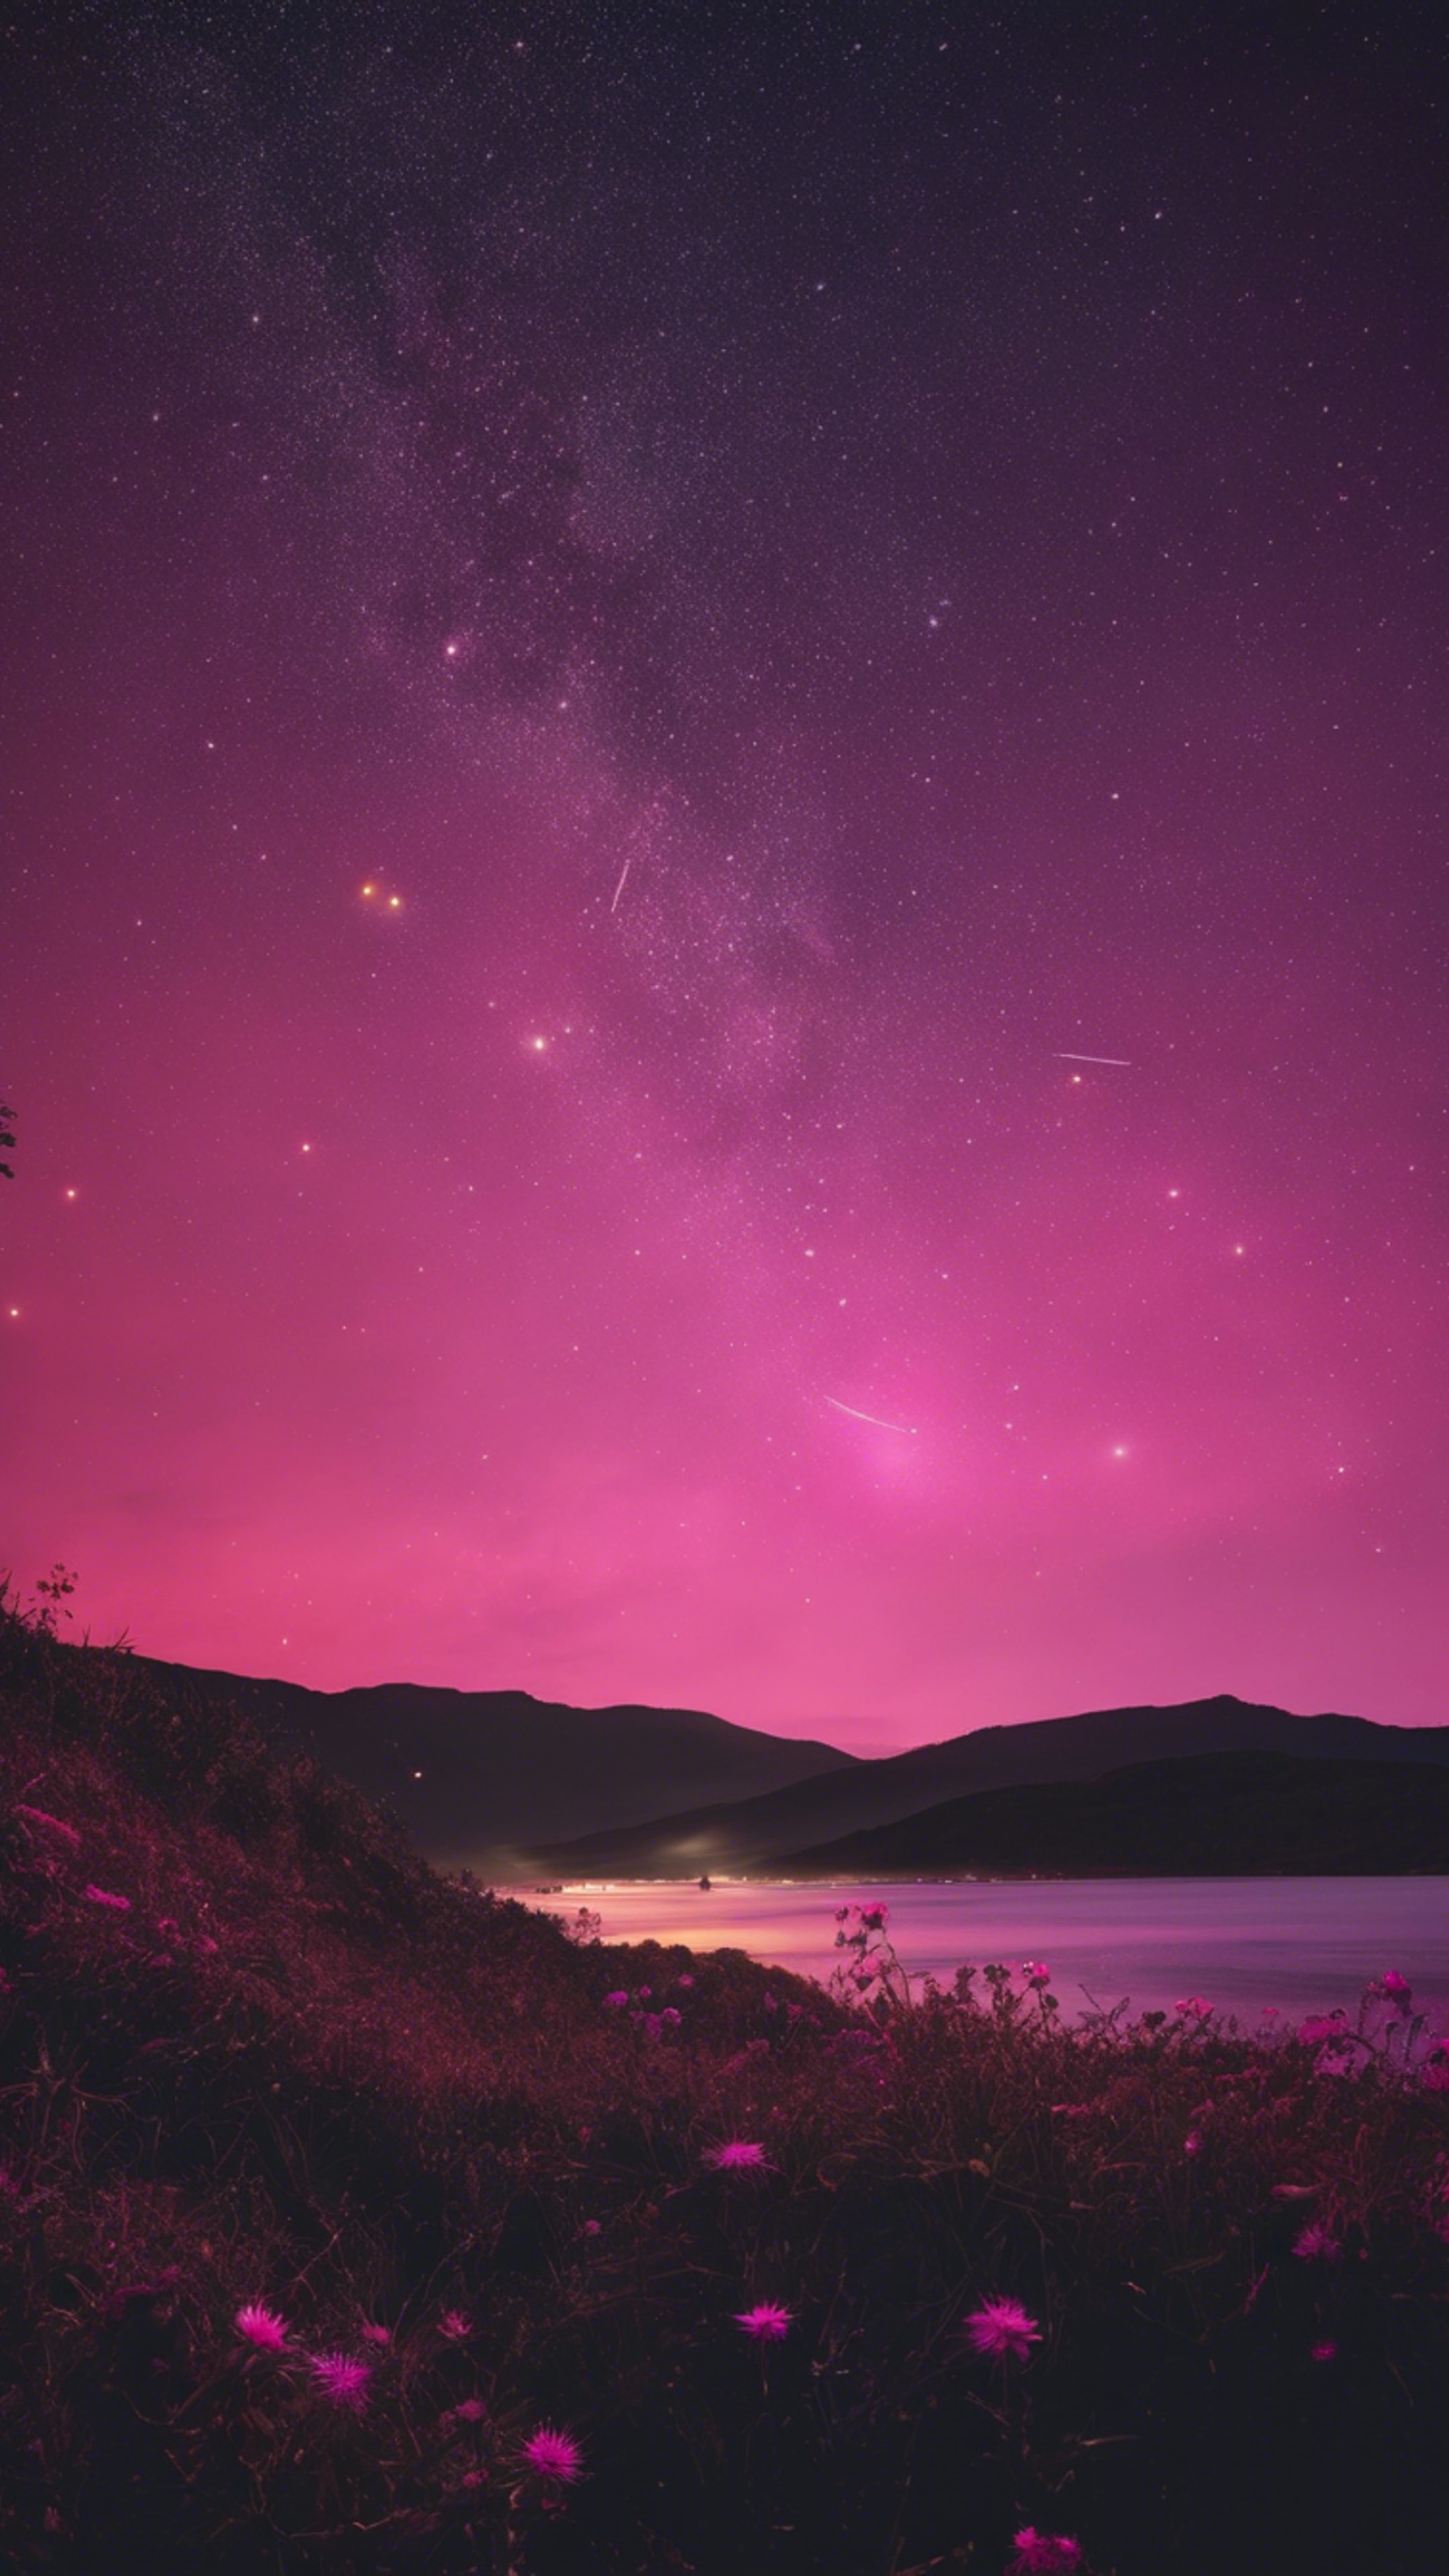 A shooting star glowing in a vibrant pink as it crosses the dark night sky. 墙纸[c8fce7a9134e4e29a83b]